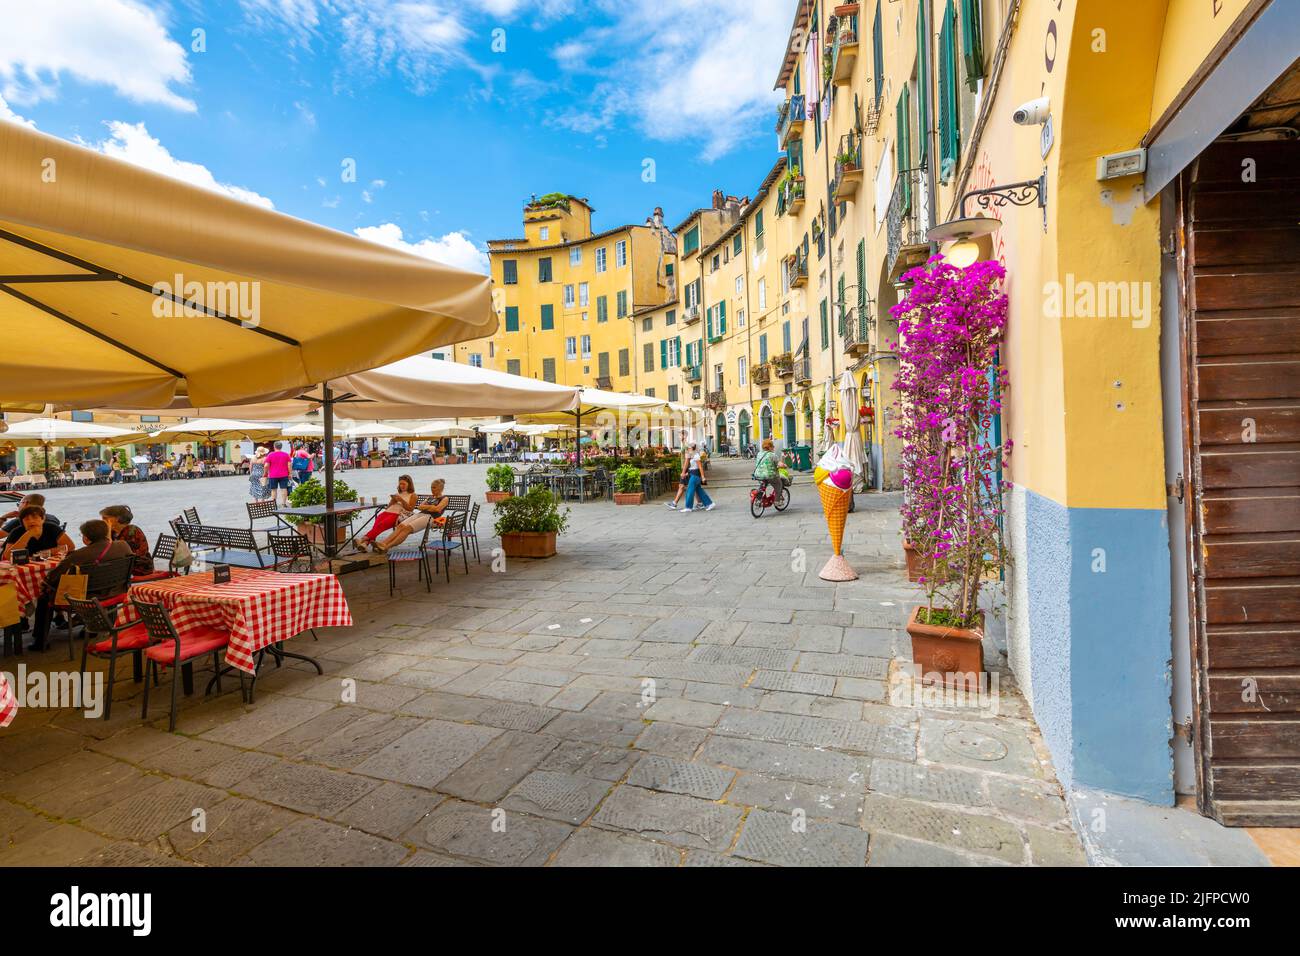 The ancient amphitheater, now a gathering place with cafes and shops, the Piazza del Anfiteatro, in the Tuscan walled town of Lucca, Italy. Stock Photo